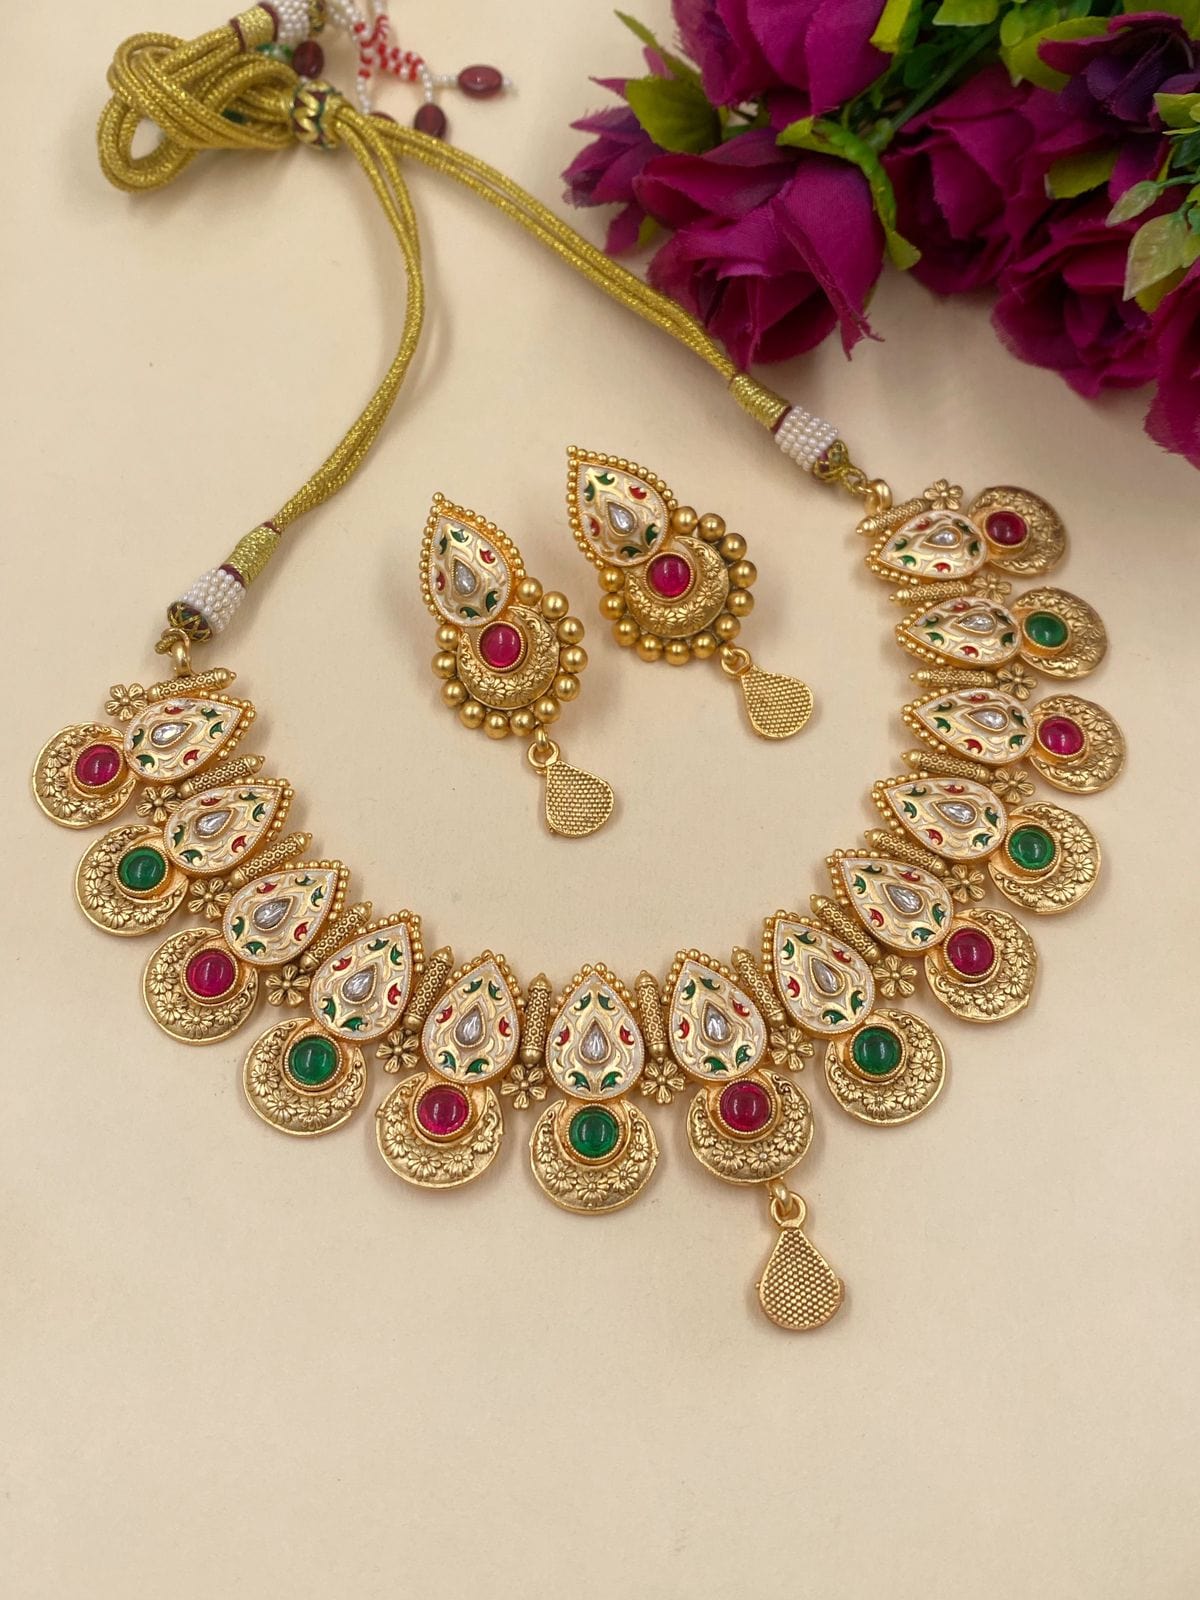 Traditional Antique Gold Meenakari Necklace For Women By Gehn Shop Meenakari Necklace Sets